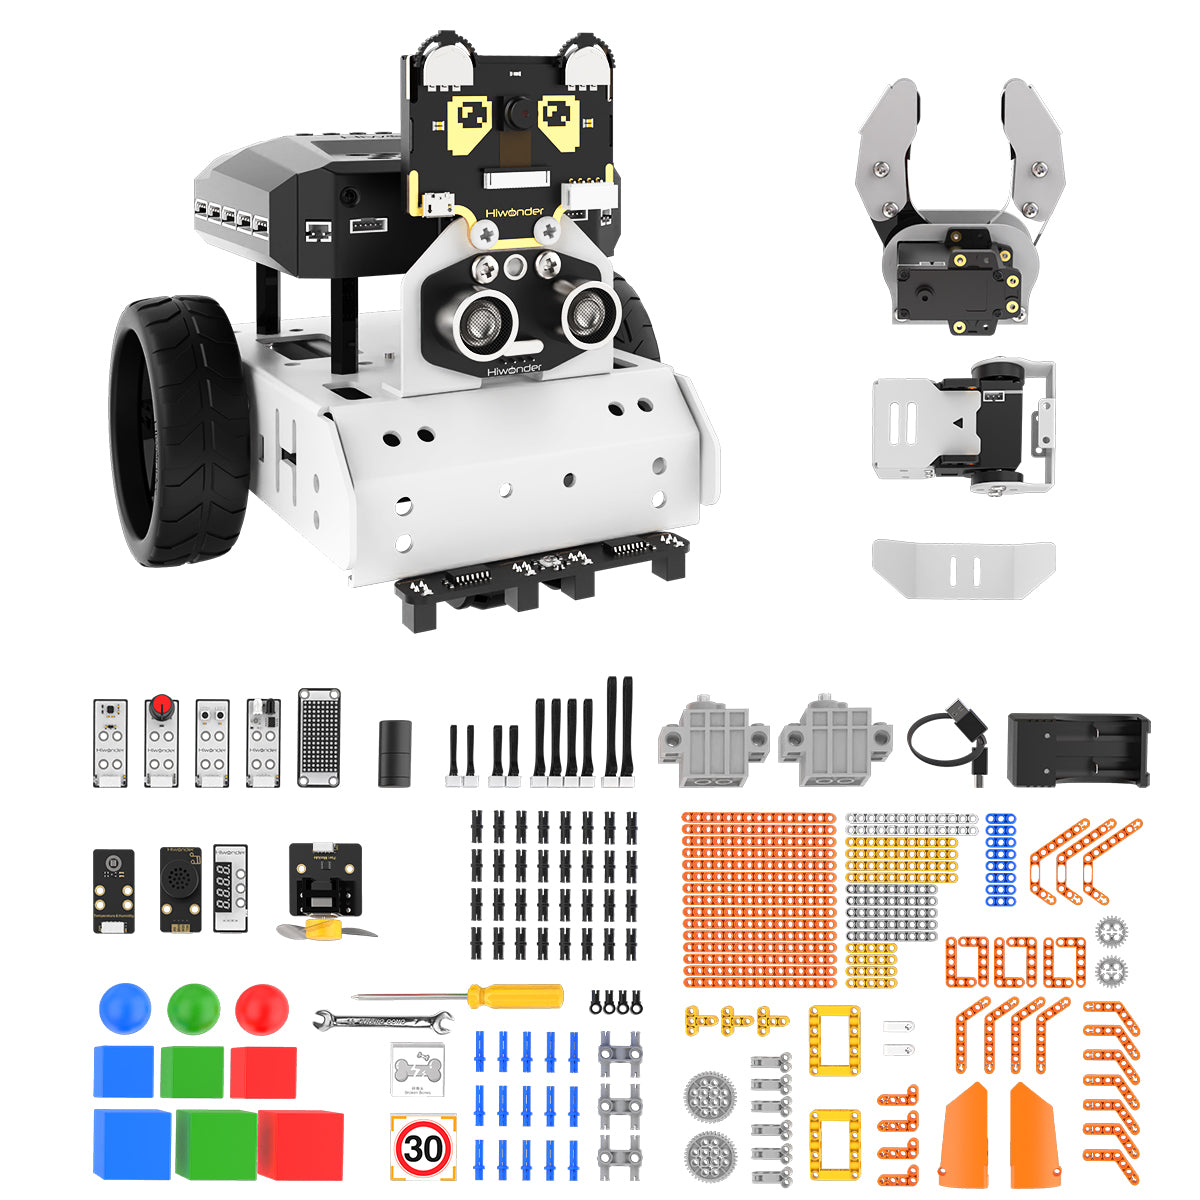 Hiwonder AiNova Pro 16-in-1 Programmable Building Robotic Kit Toys Support Scratch & Python for Kids Ages 12+